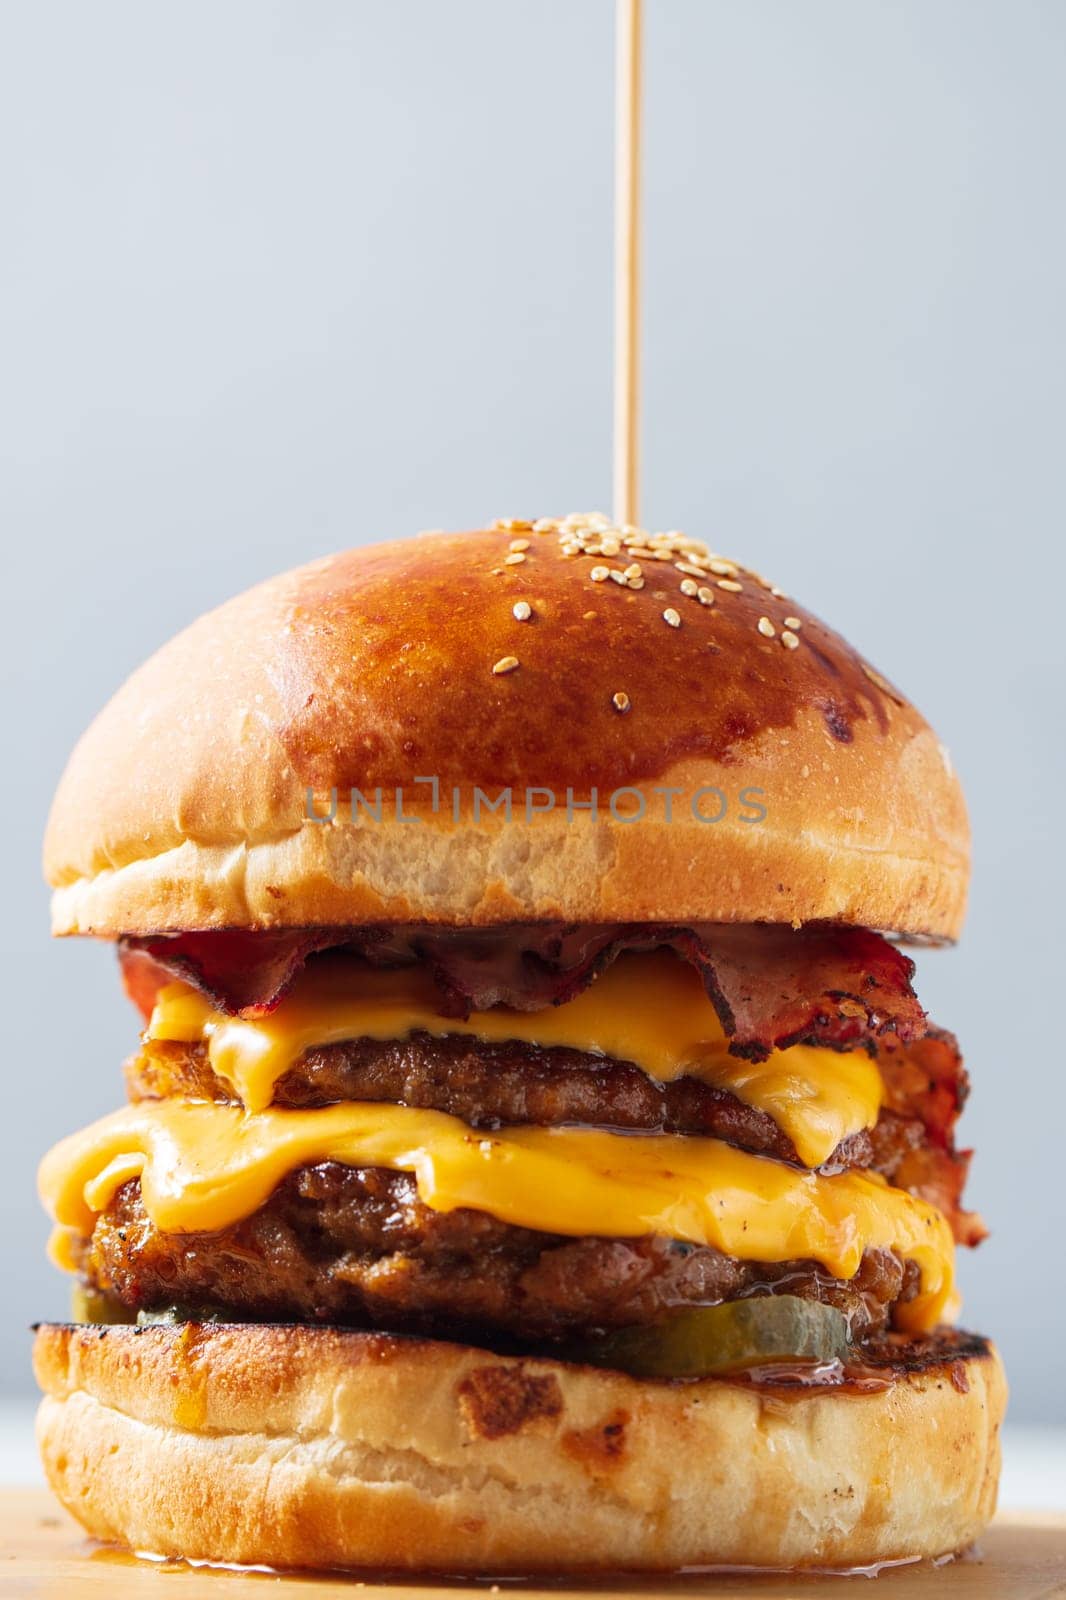 Burger. Double cutlet, double cheddar cheese, bacon, deep-fried onions, pickles, sauce and craft bun. High quality photo